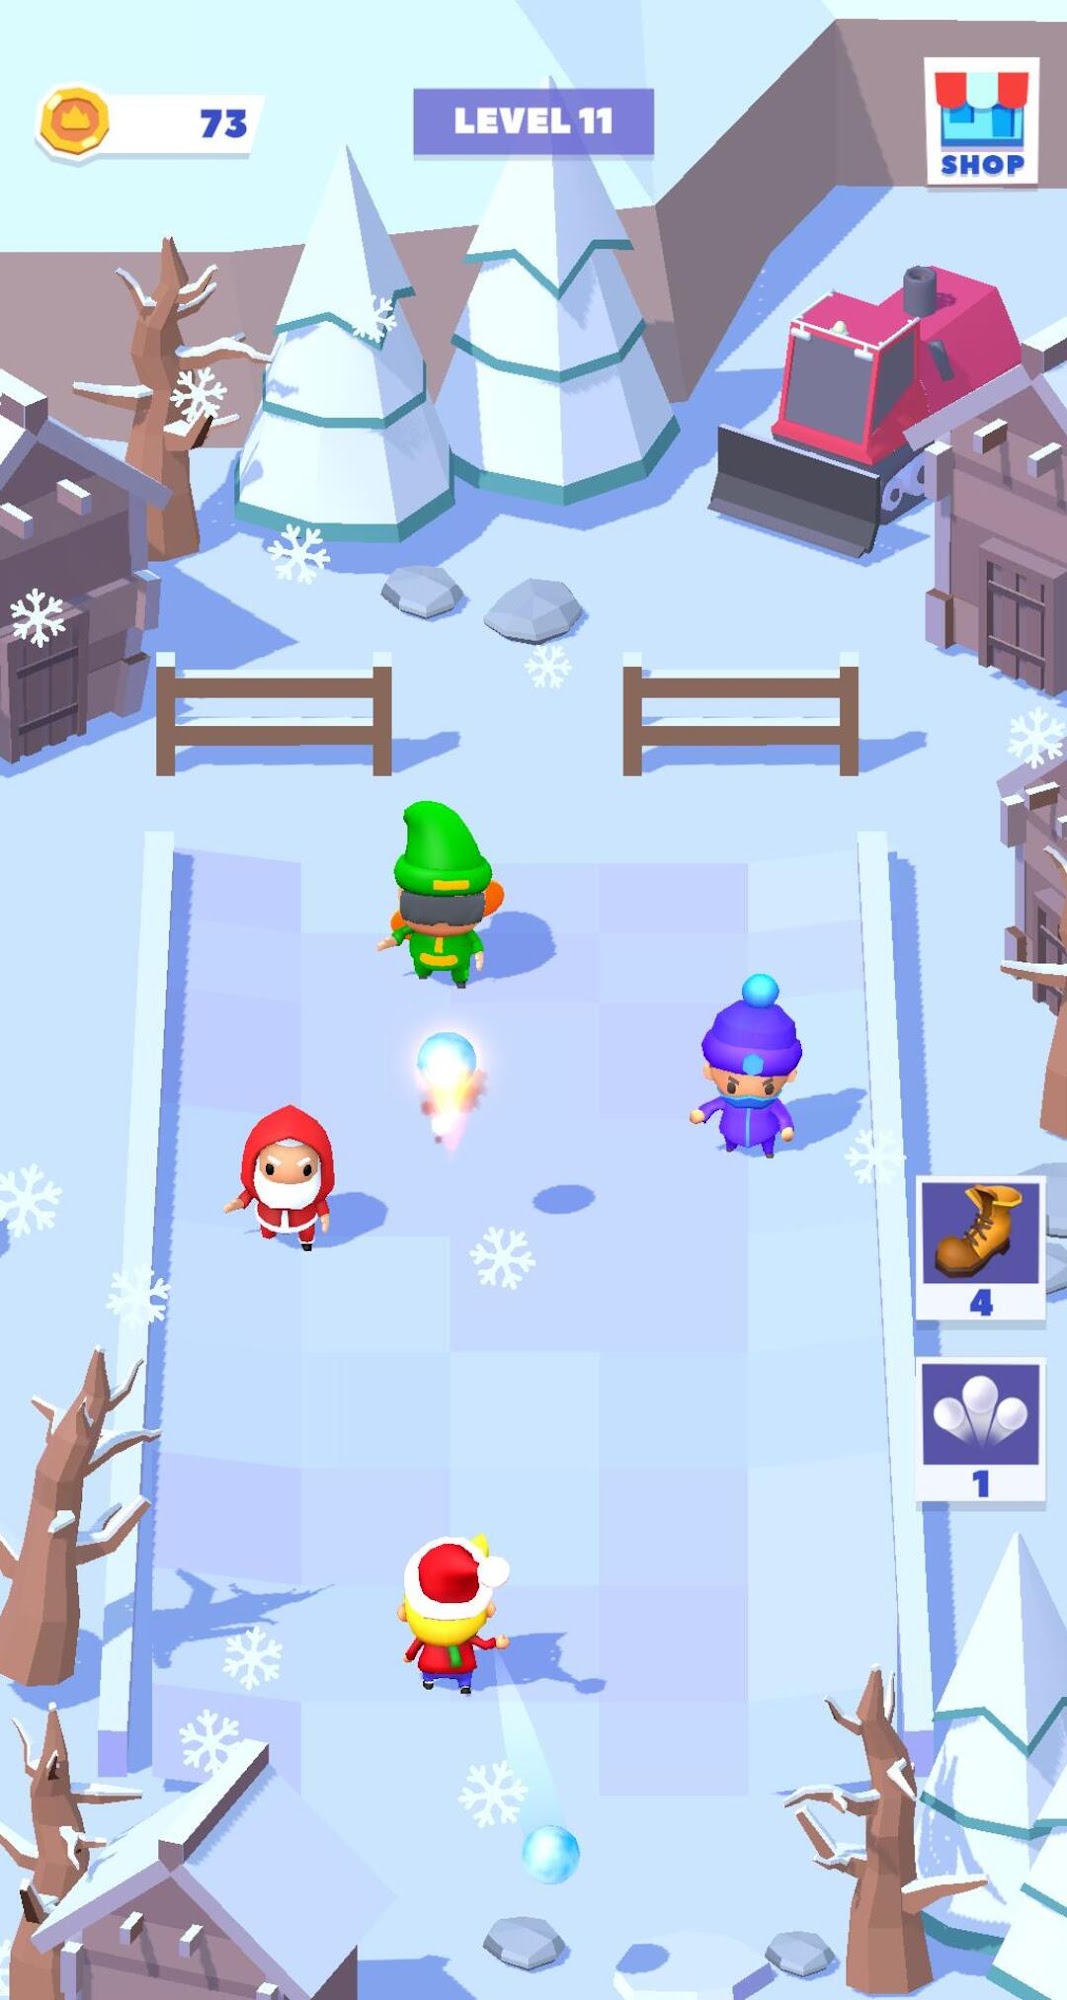 Gameplay of the Snowball Battle for Android phone or tablet.